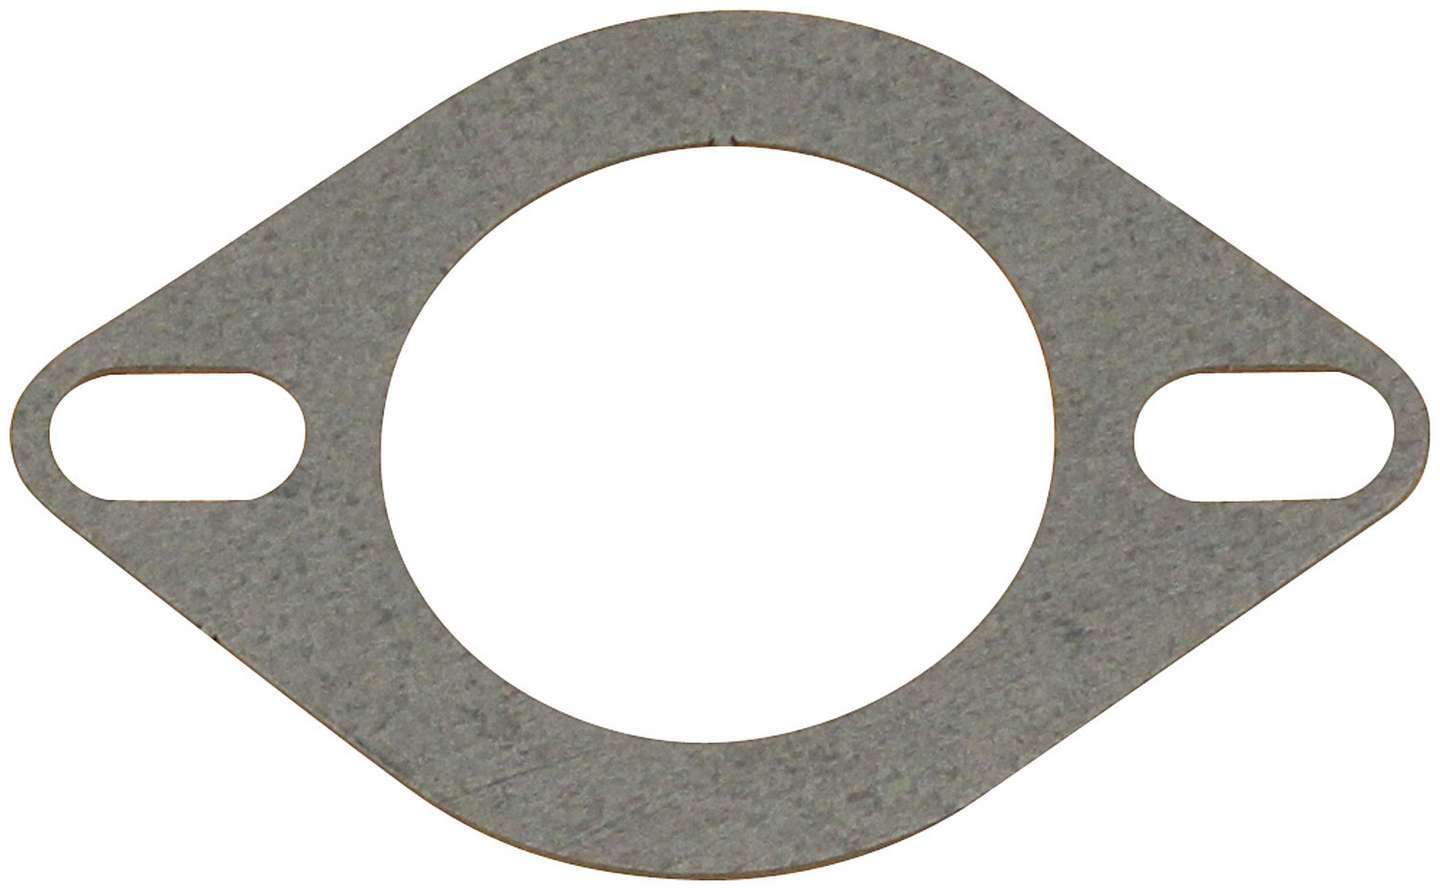 Small Block for Chevy Each 87236 Composite Allstar Fuel Pump Gasket 